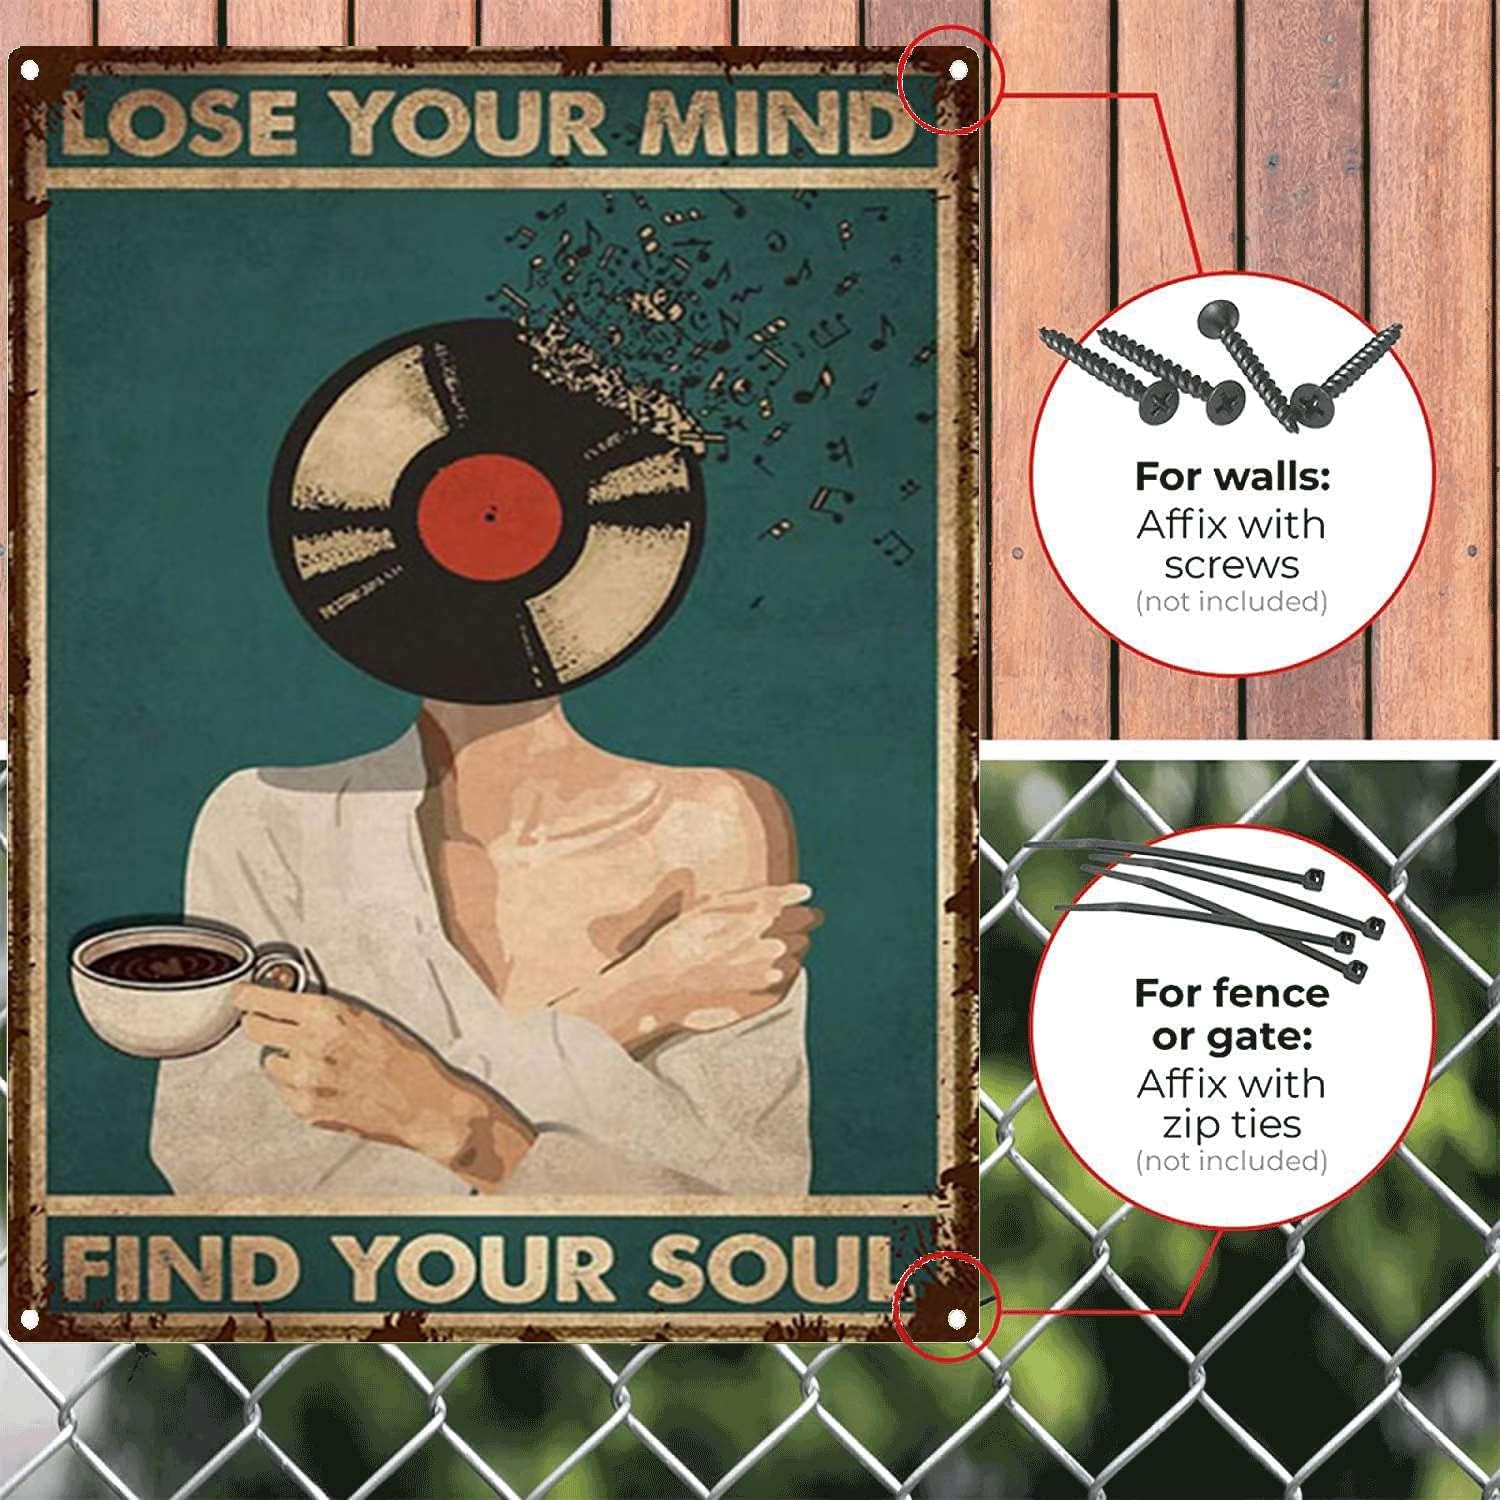 YLUYINOM Tin Metal Signs Lose Your Mind Find Your Soul Poster, Vinyl Records Music Poster, Vinyl Poster, Coffee and Music Poster, Coffee Music Poster No Framed 8X12 inch-Tin Painting, Black